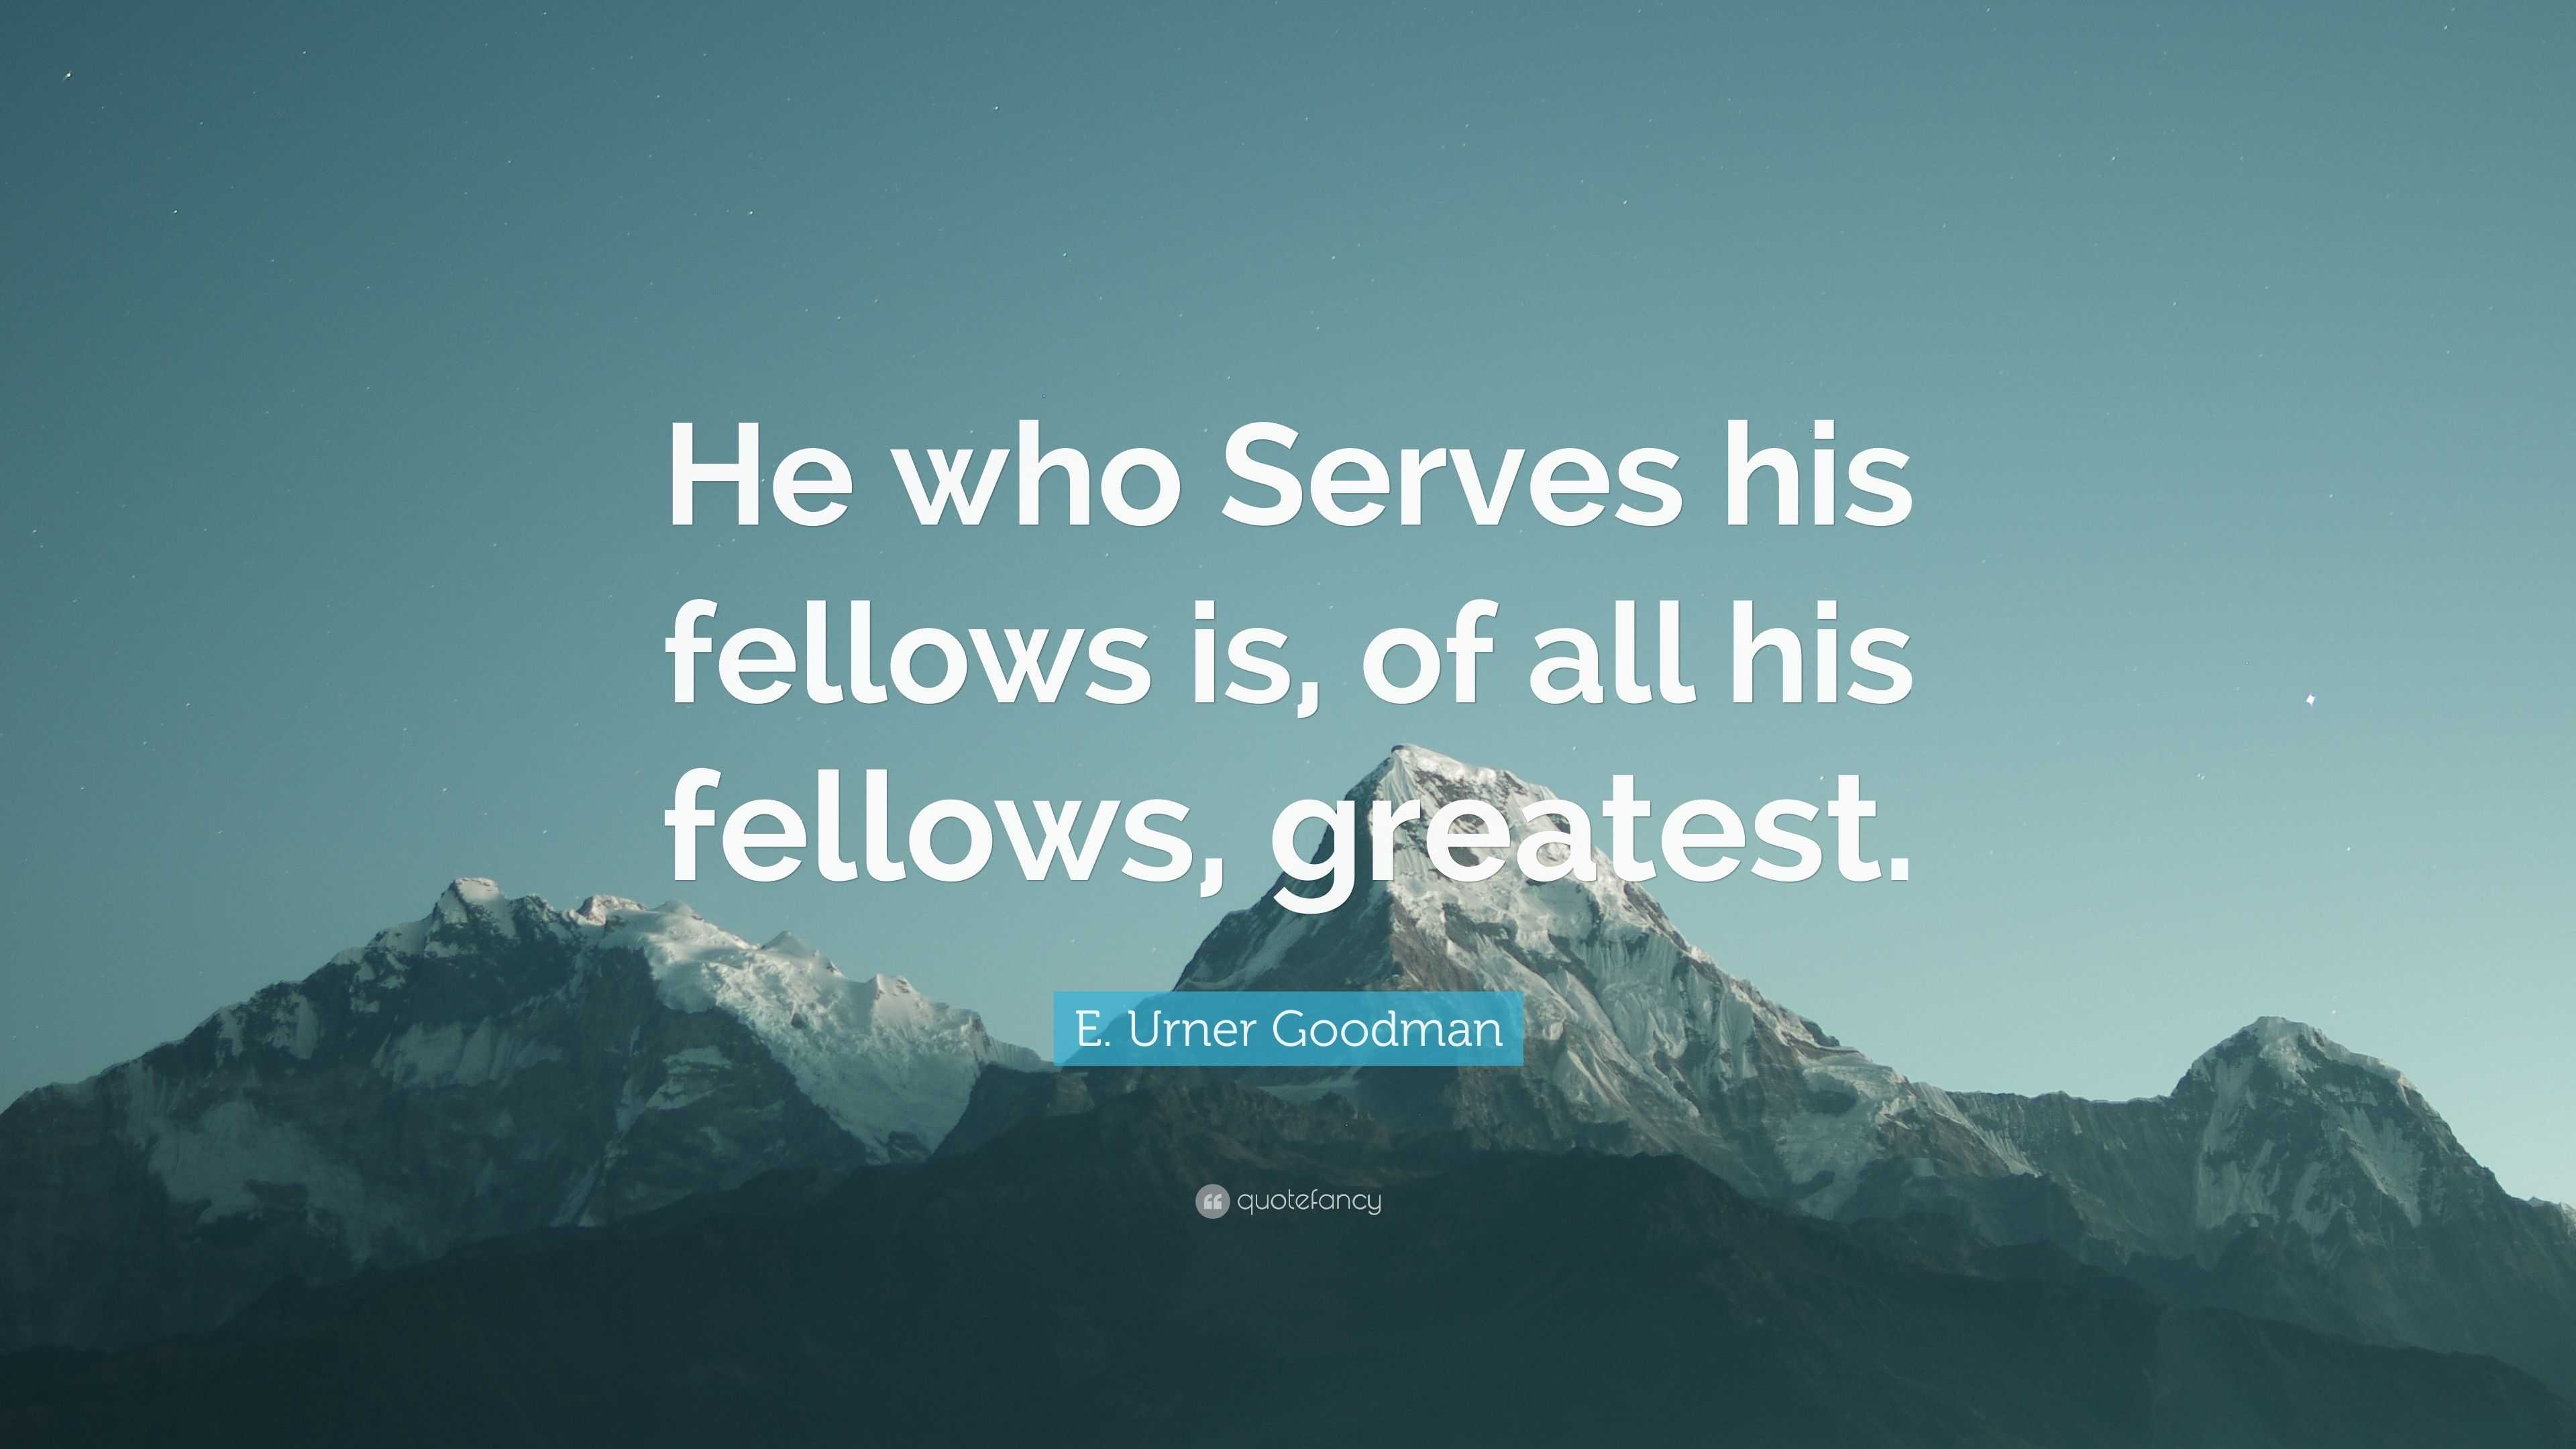 E. Urner Goodman Quote: “He who Serves his fellows is, of all his ...